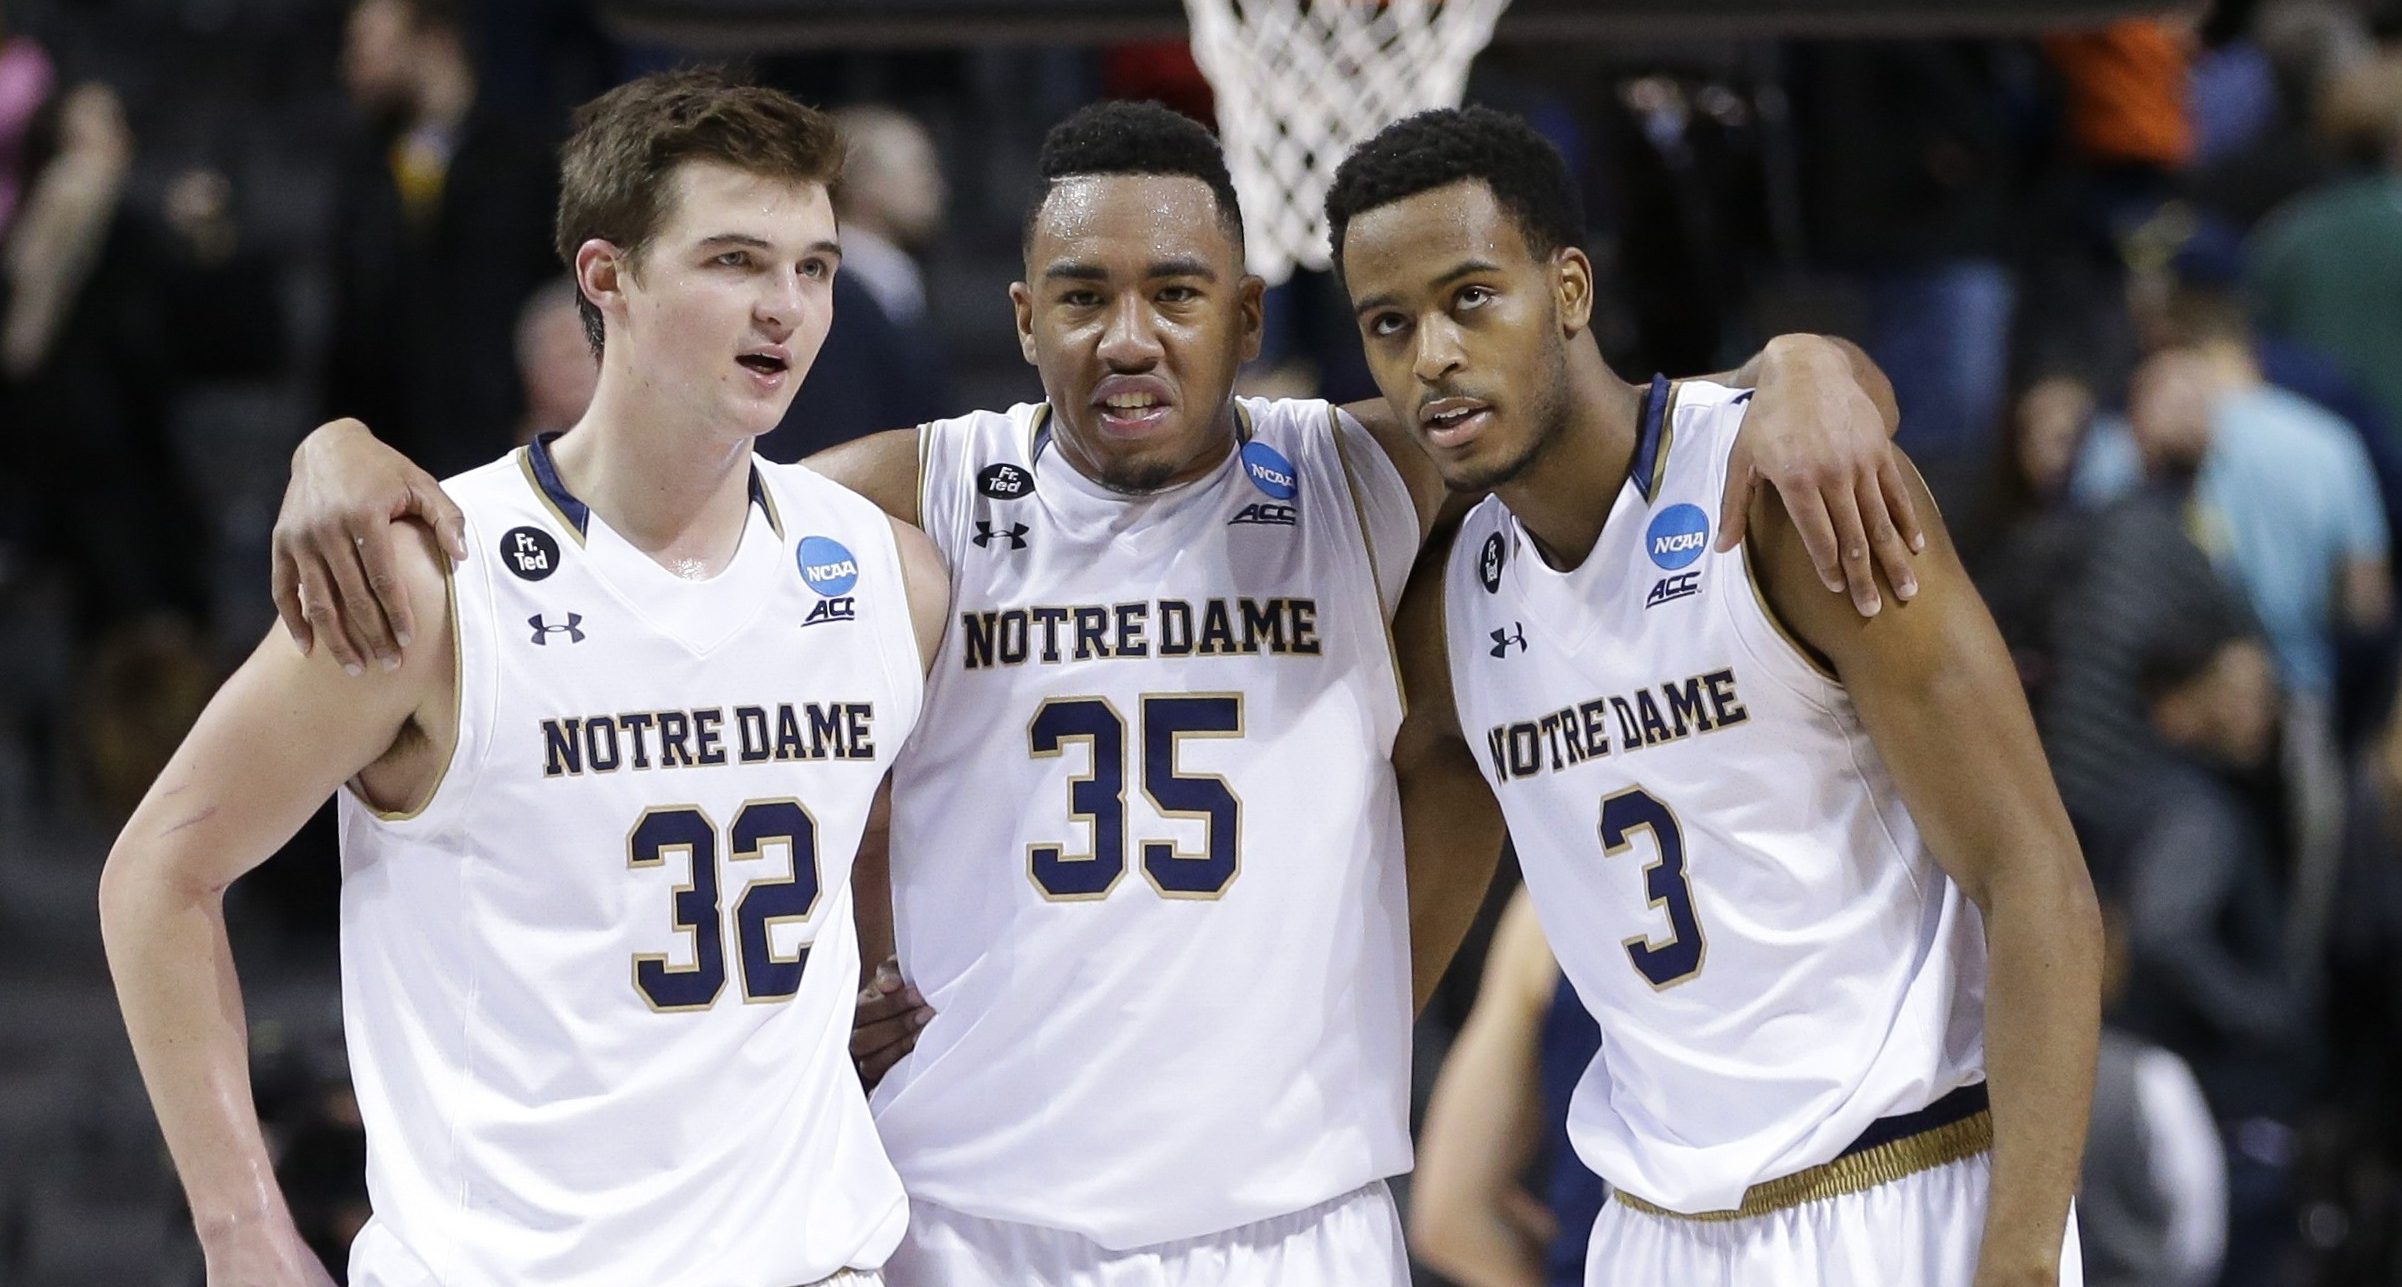 Notre Dame's Steve Vasturia (32), Bonzie Colson (35) and V.J. Beachem (3) talk during the second half of a first-round men's college basketball game against Michigan in the NCAA Tournament, Friday, March 18, 2016, in New York. Notre Dame won 70-63. (AP Photo/Frank Franklin II)